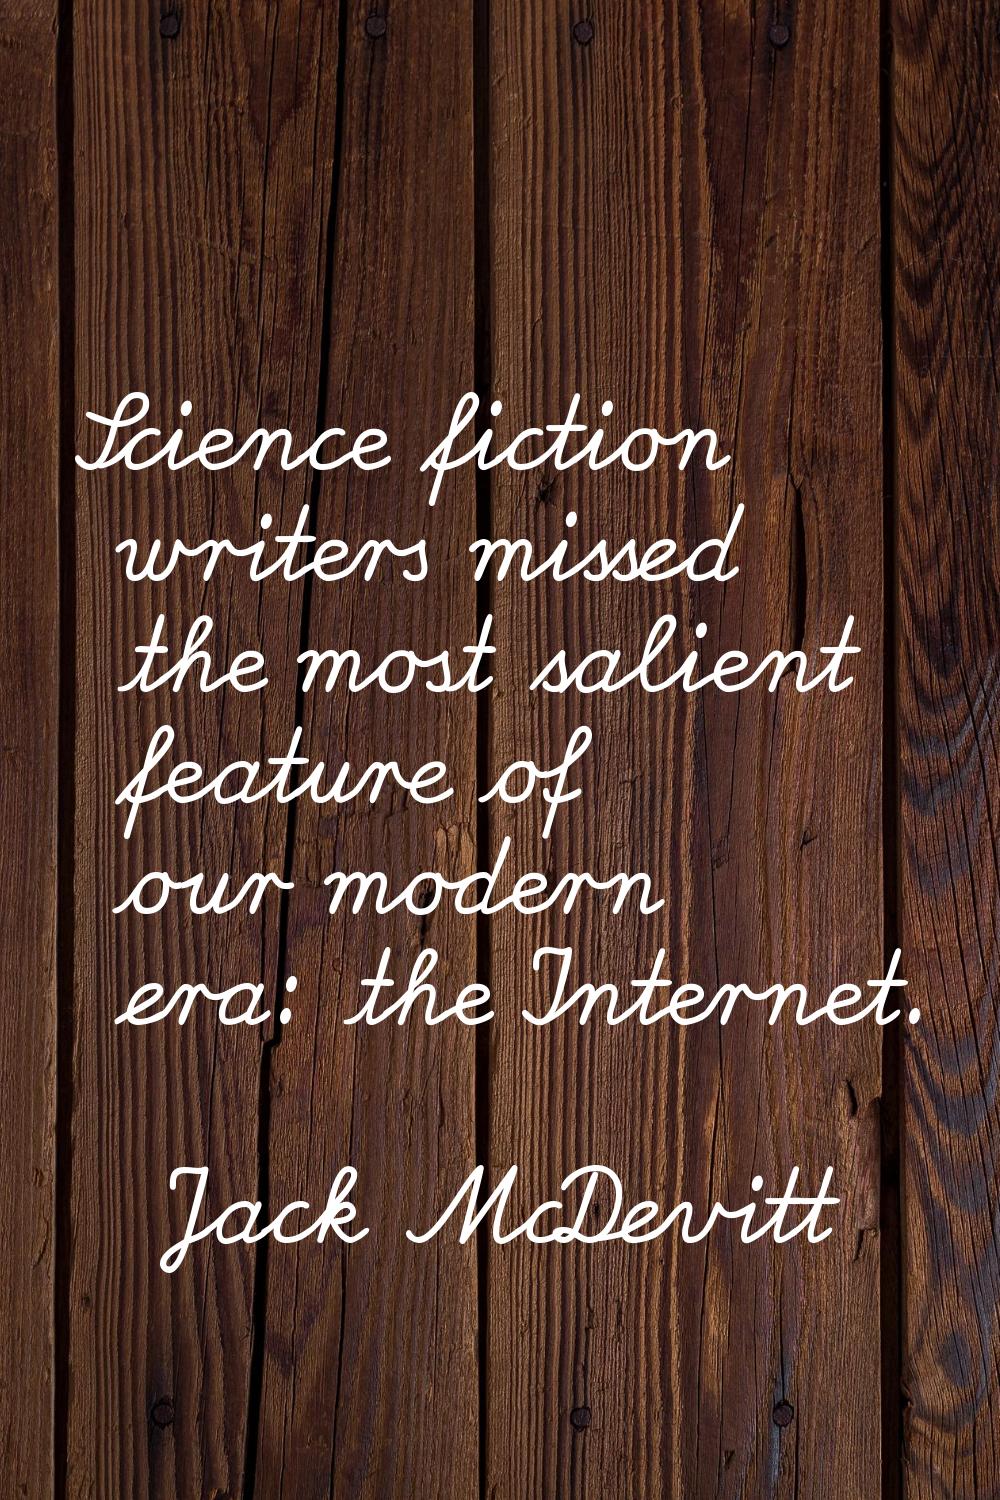 Science fiction writers missed the most salient feature of our modern era: the Internet.